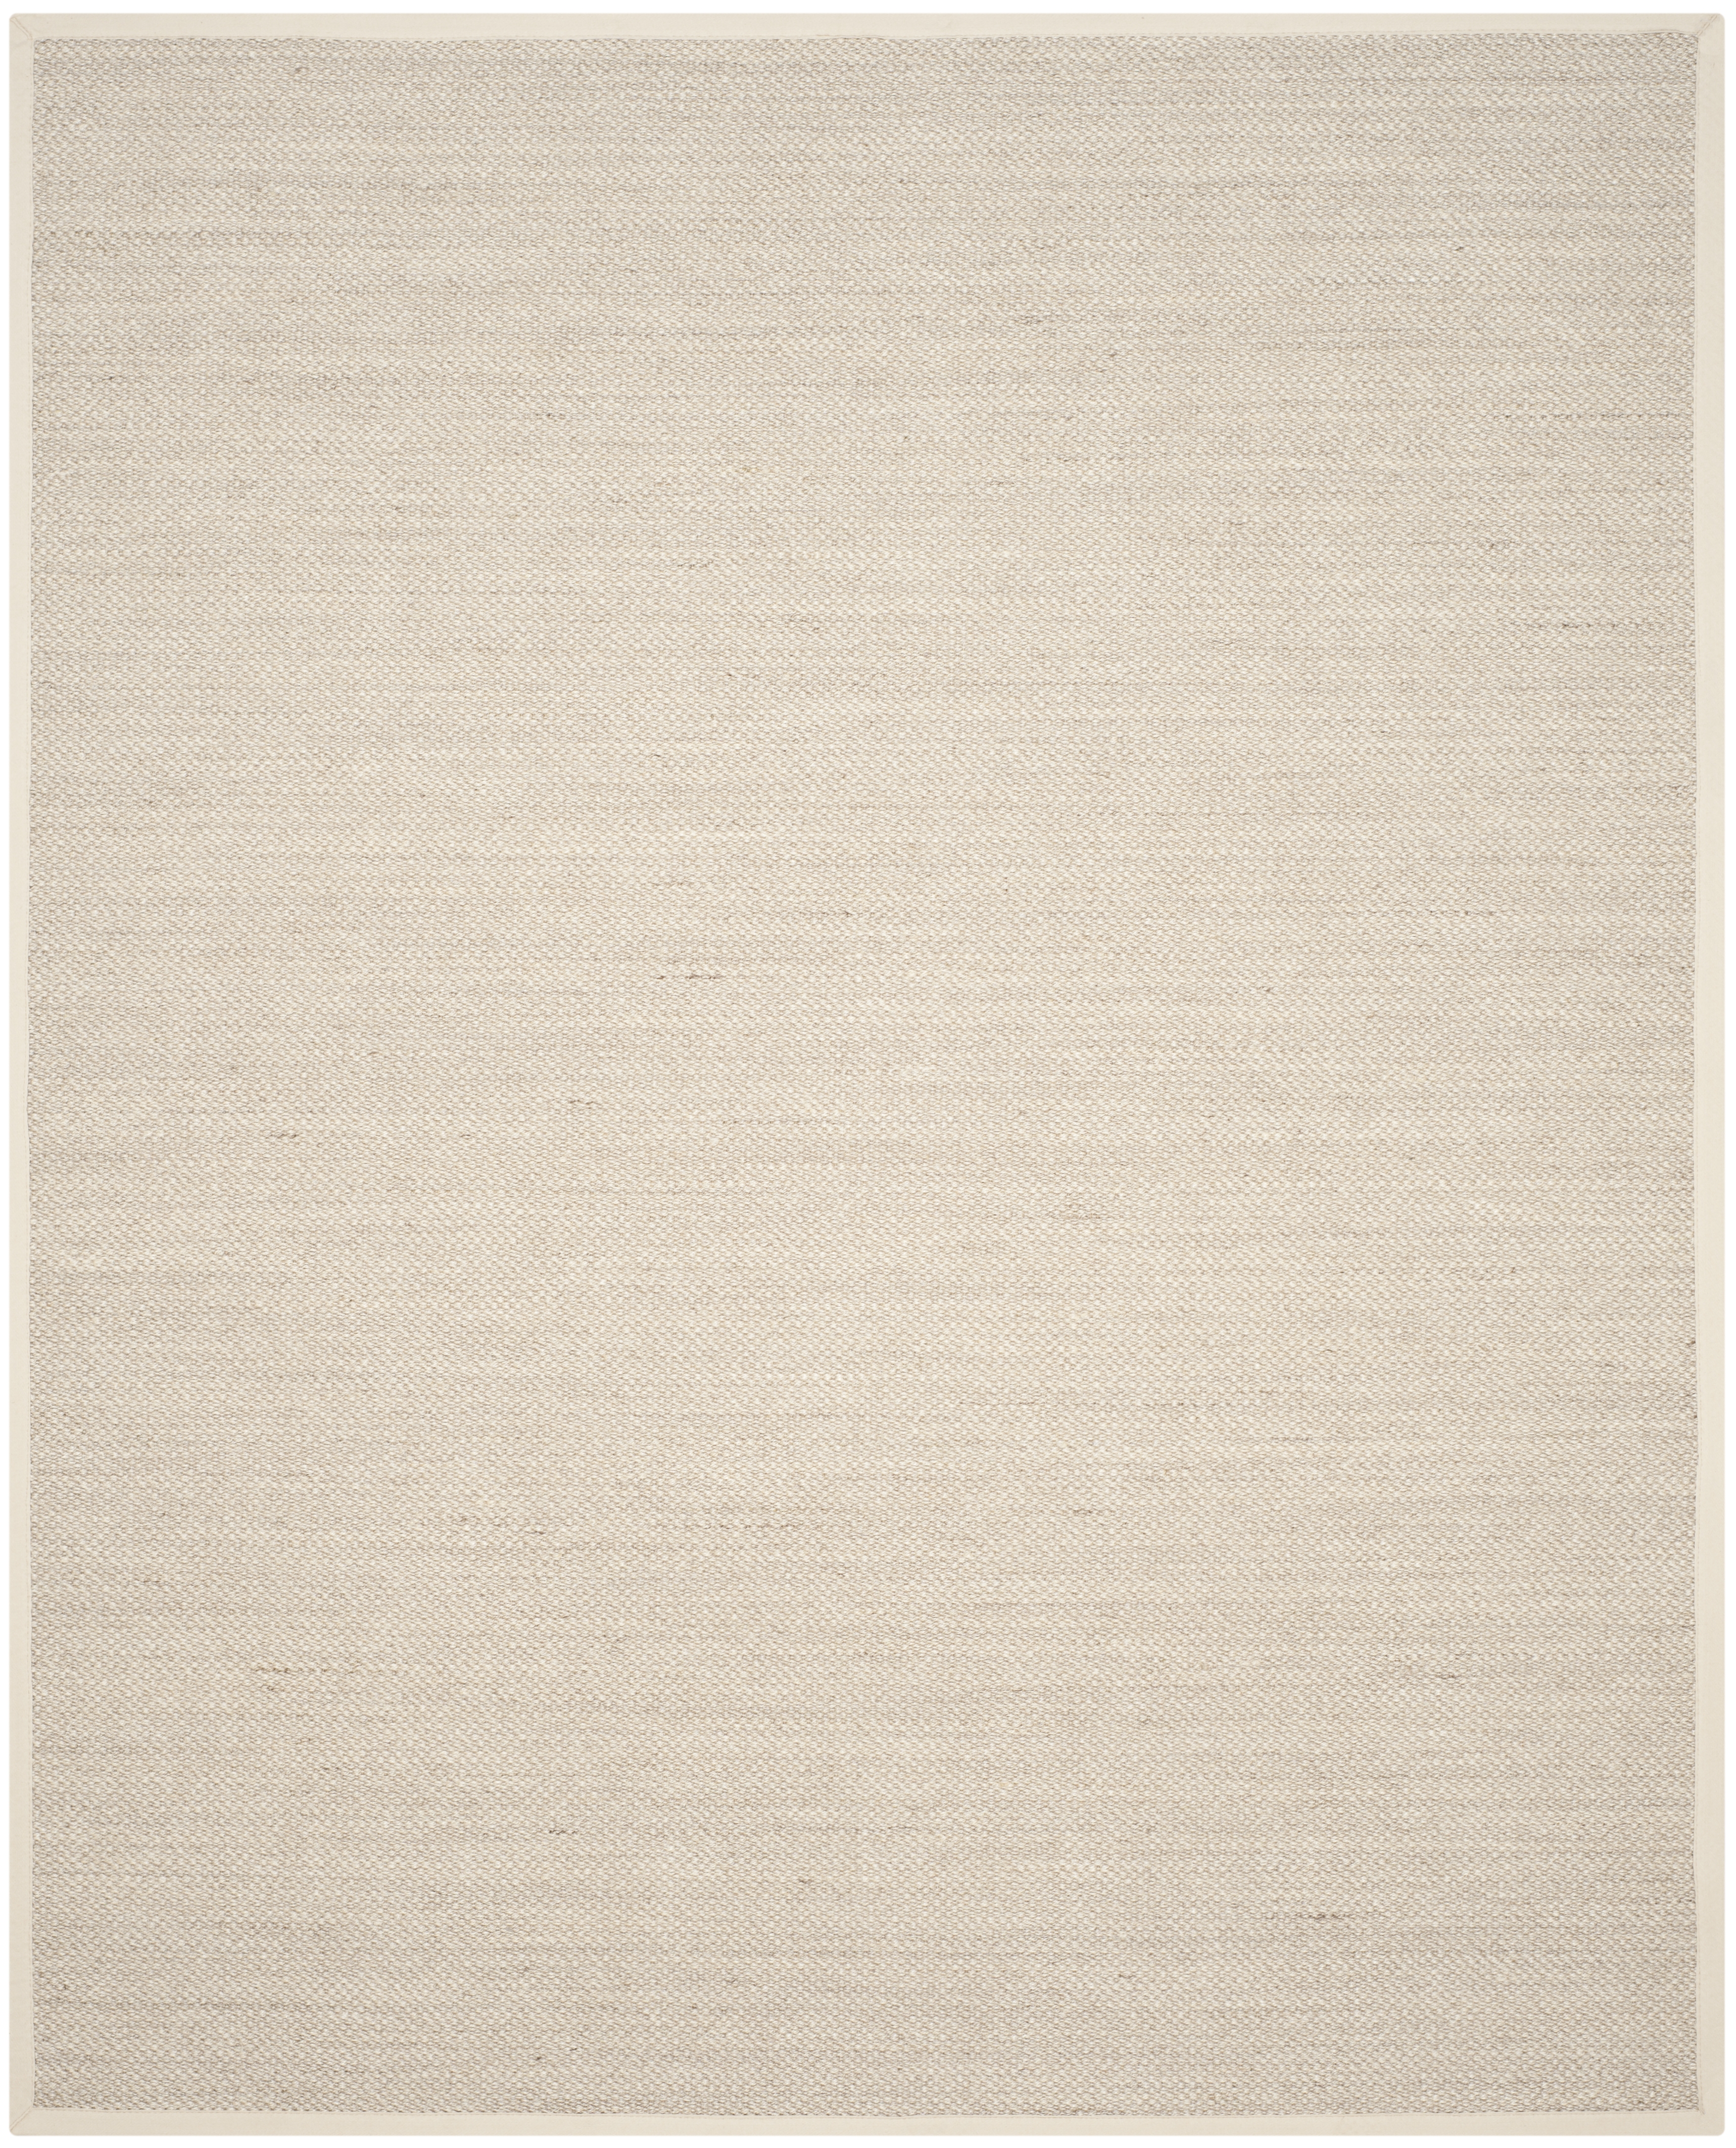 Arlo Home Woven Area Rug, NF143C, Marble/Beige,  8' X 10' - Image 0